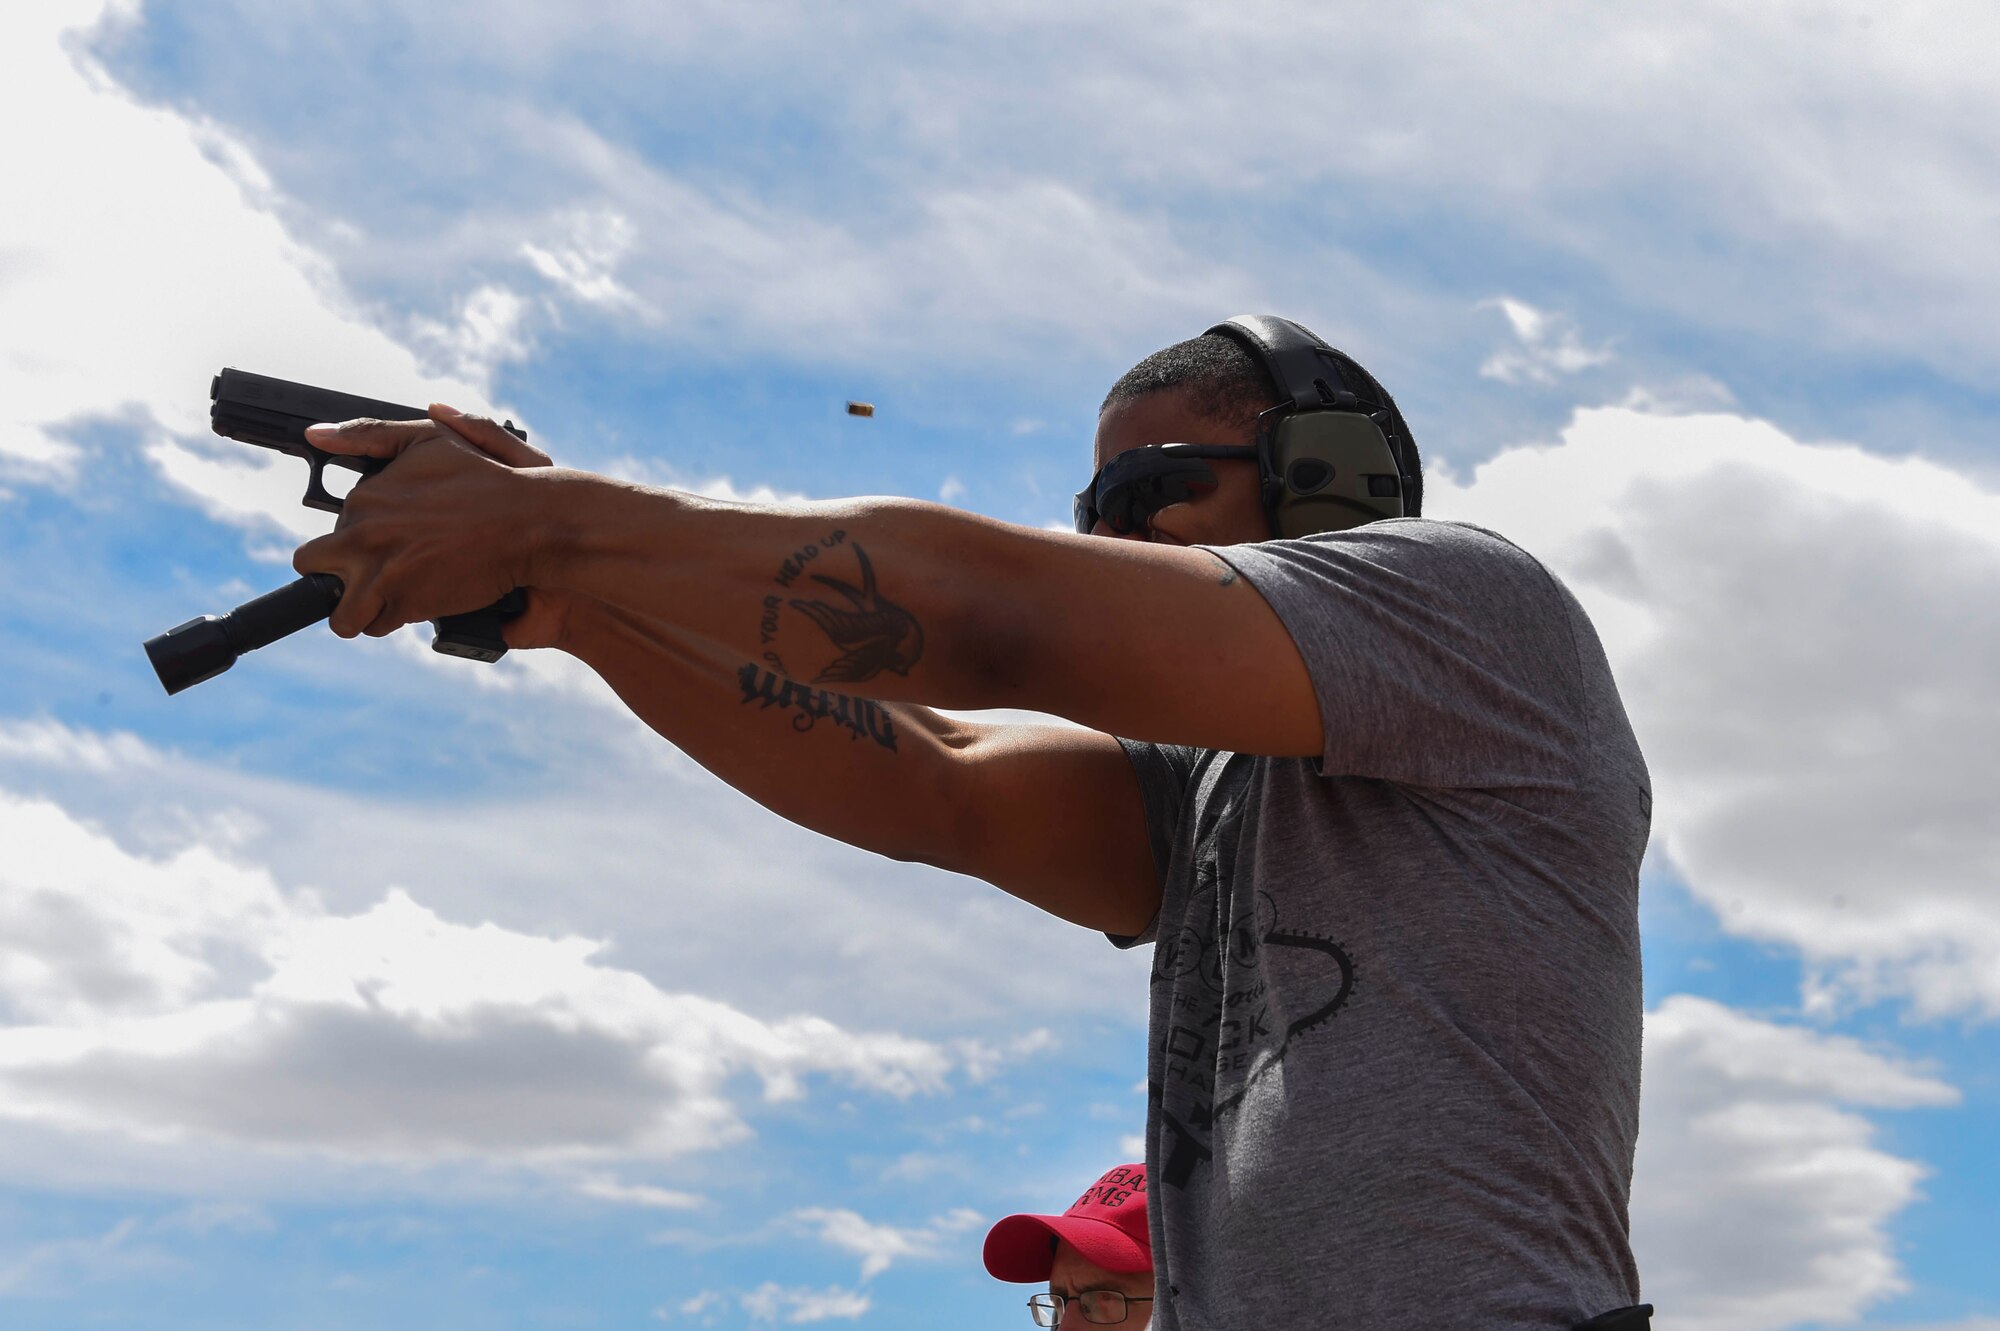 Staff Sgt. Clifford fires his weapon at Station Four during the Nellis/Creech Law Enforcement Pistol Shoot as part of Police Week May 15, 2016, at Silver Flag Alpha, Nev. National Police Week takes place annually to honor the service and sacrifice of civilian and military law enforcement members. (U.S. Air Force photo Airman 1st Class Adarius Petty)